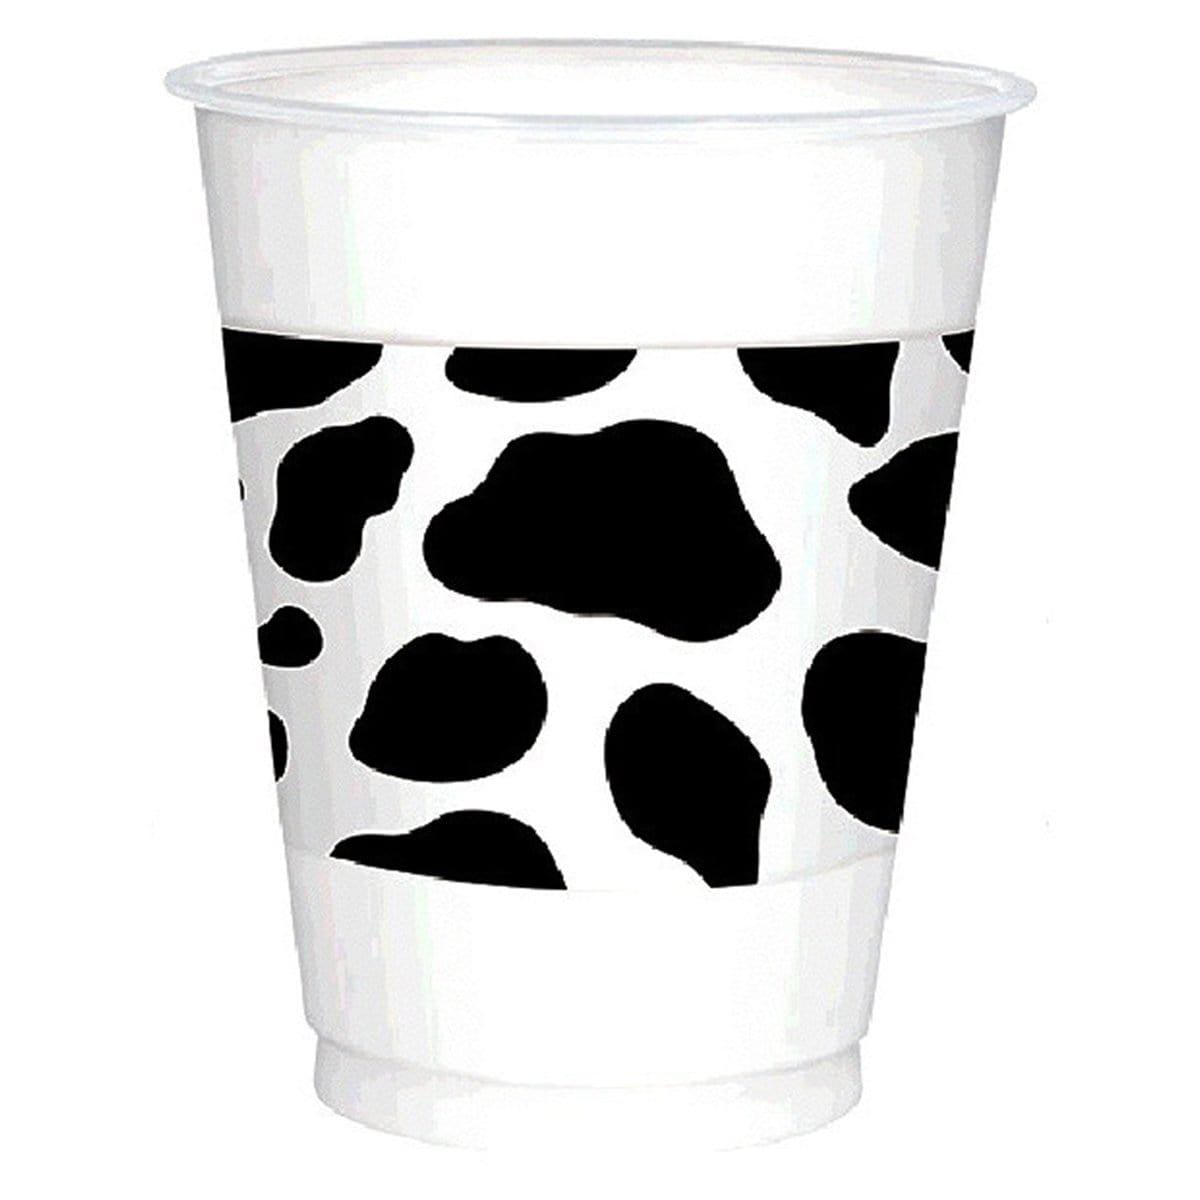 Buy Theme Party Yee-Haw Plastic Cups 16 Ounces, 25 per Package sold at Party Expert